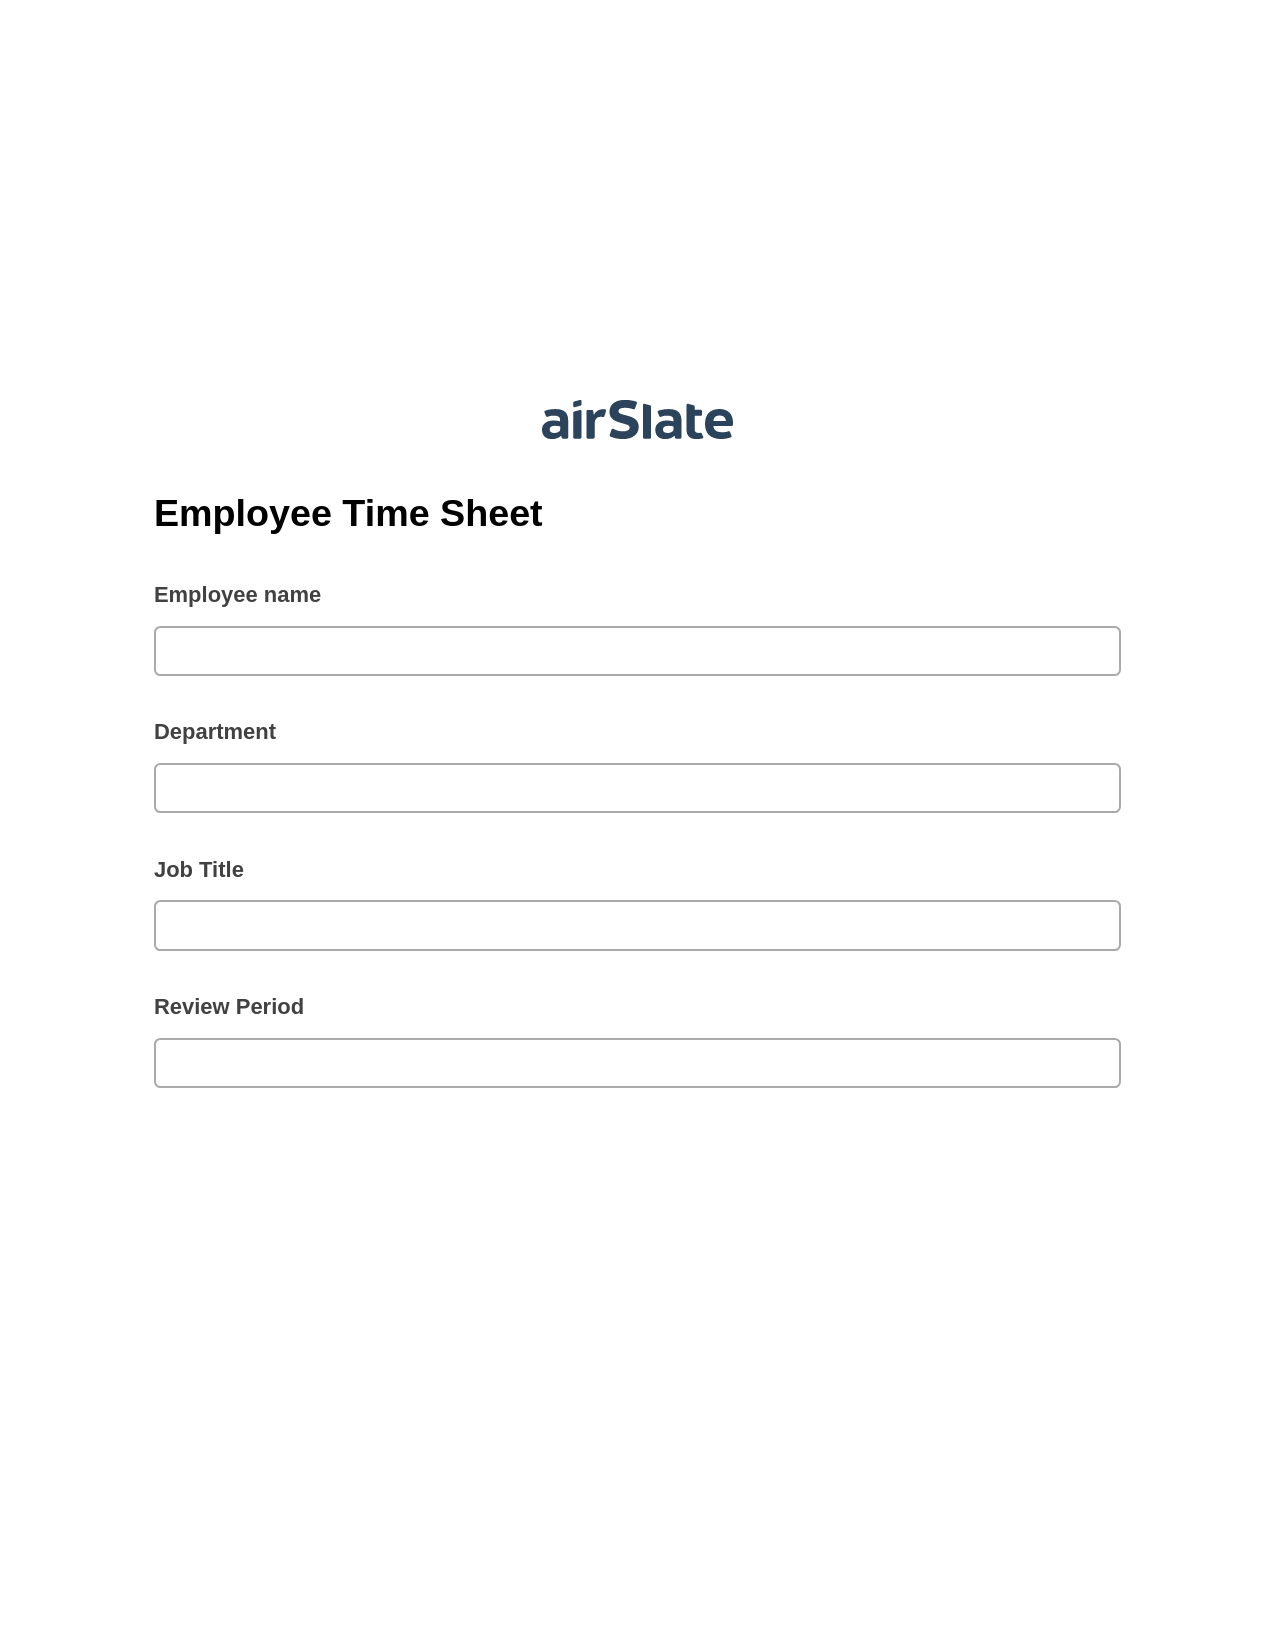 Employee Time Sheet Pre-fill from CSV File Bot, Create slate addon, Export to Excel 365 Bot